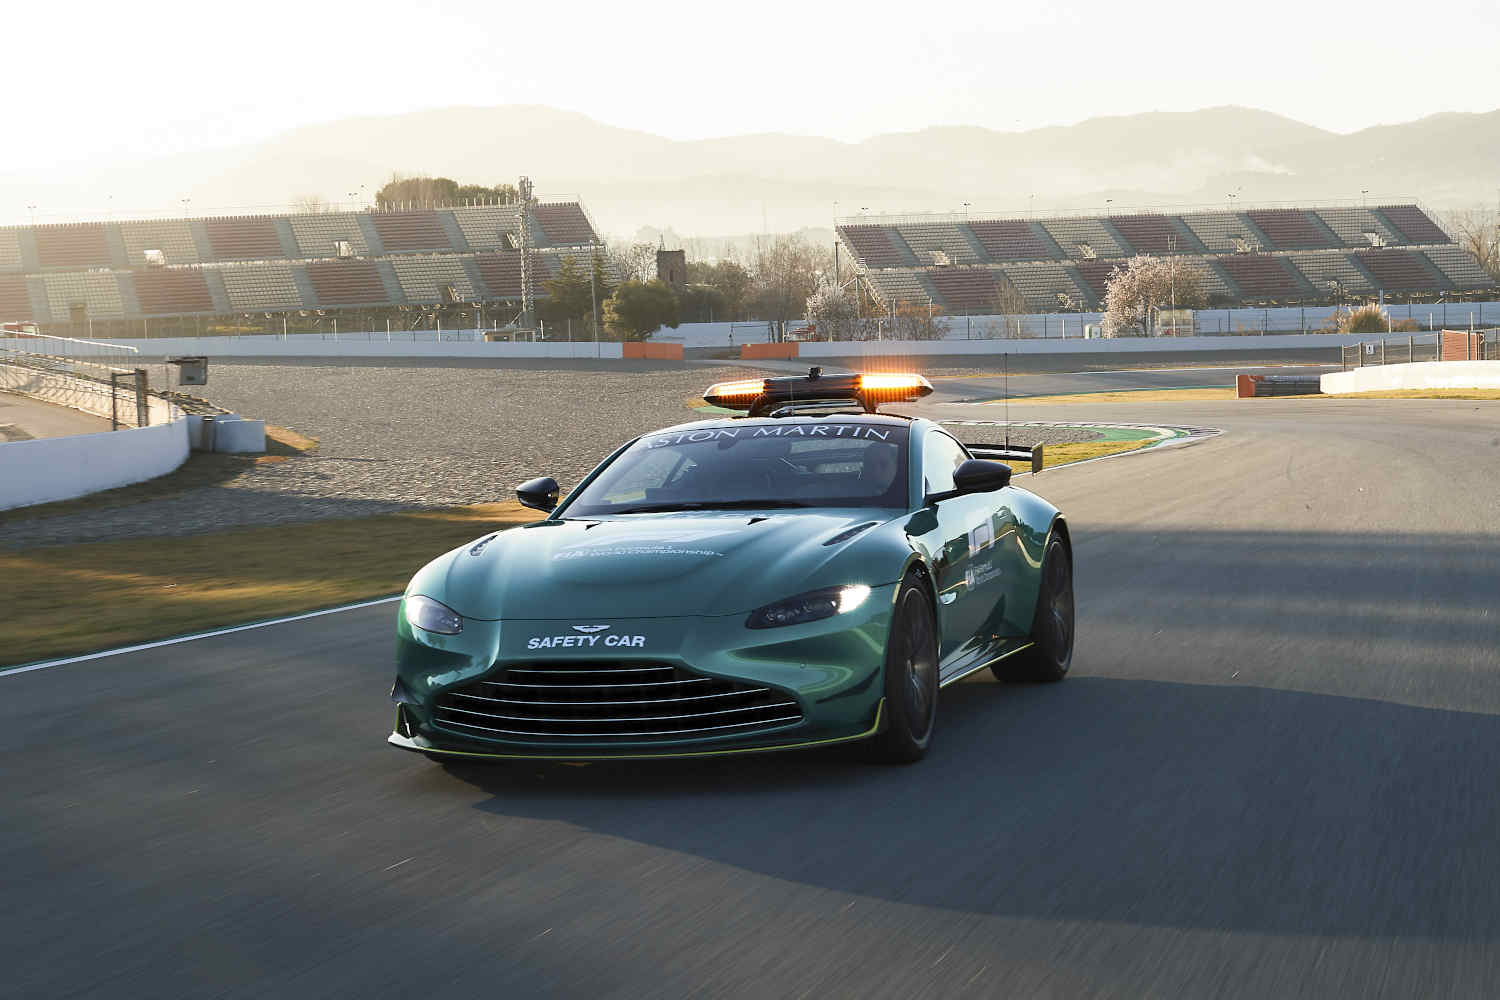 The Aston Martin Formula 1 safety car on the track, with the the Vantage F1 Edition available off-track